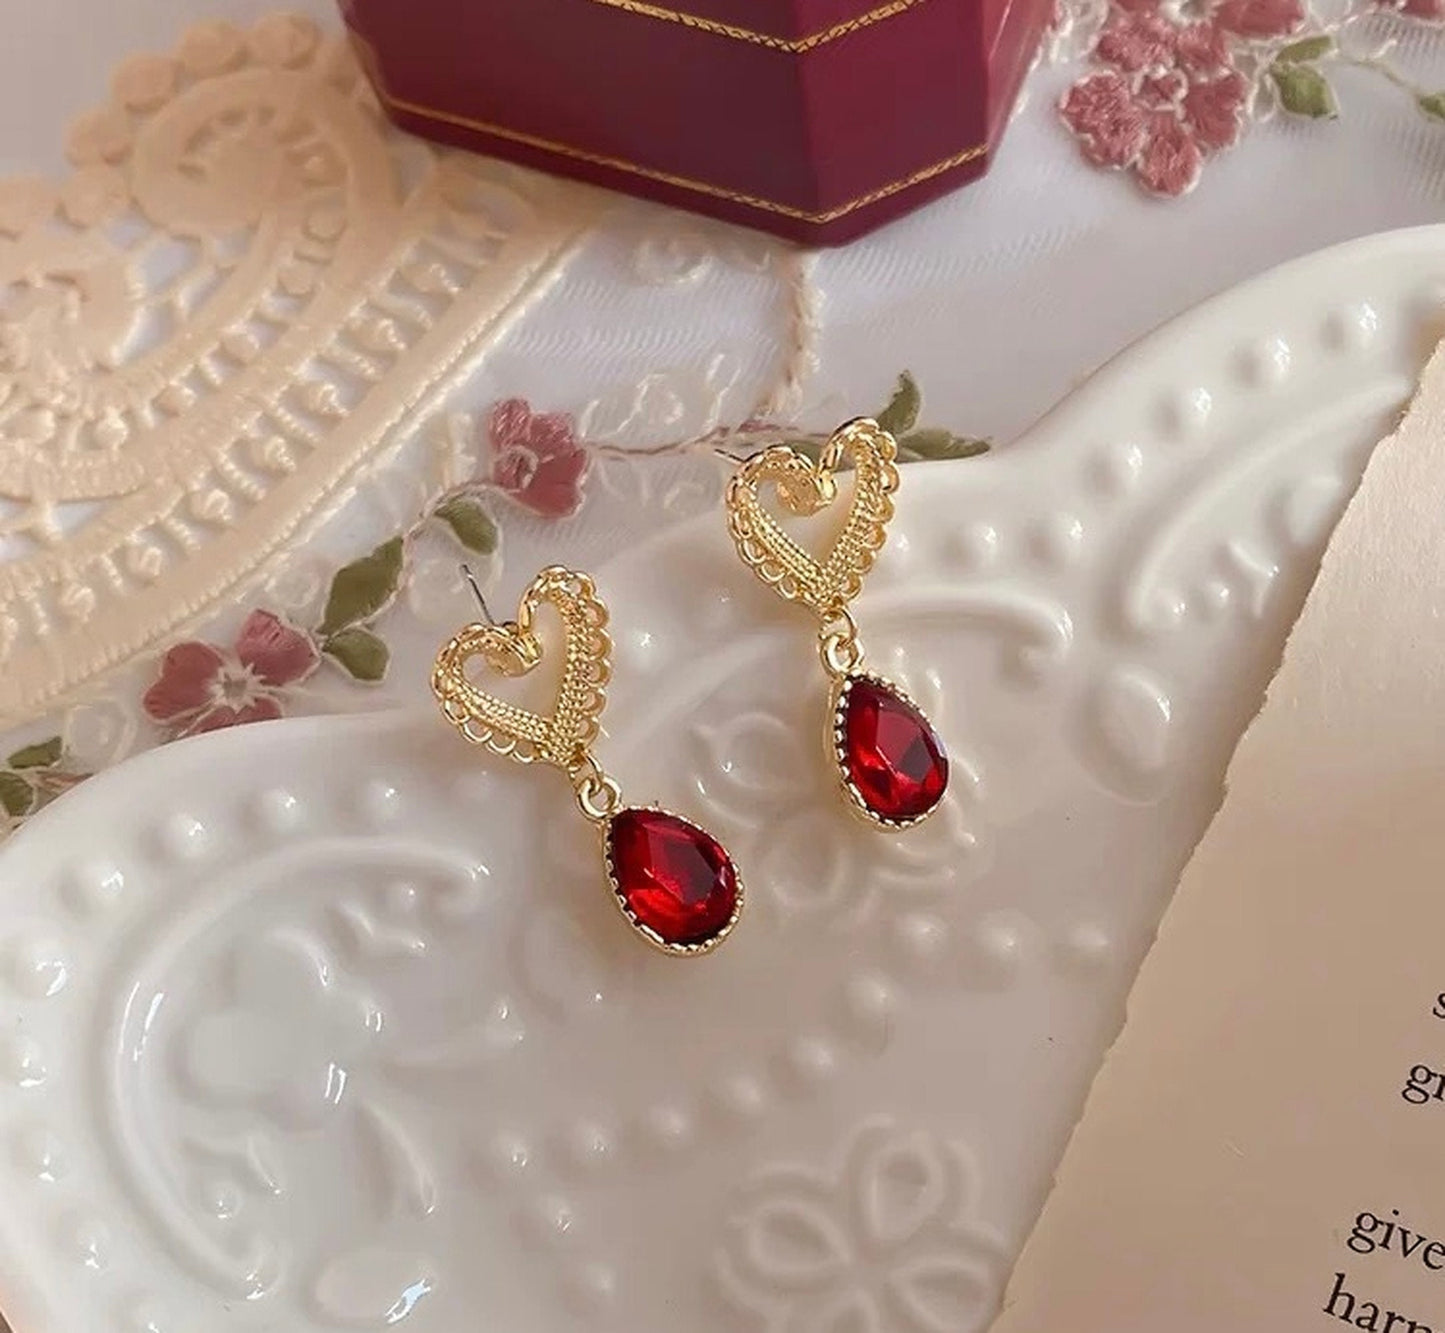 Red Heart Earrings, Romantic Gold Earrings, Red Dangle Earrings, Party Earrings, Gold Lace Earrings, Bridesmaid Anniversary Gift for her